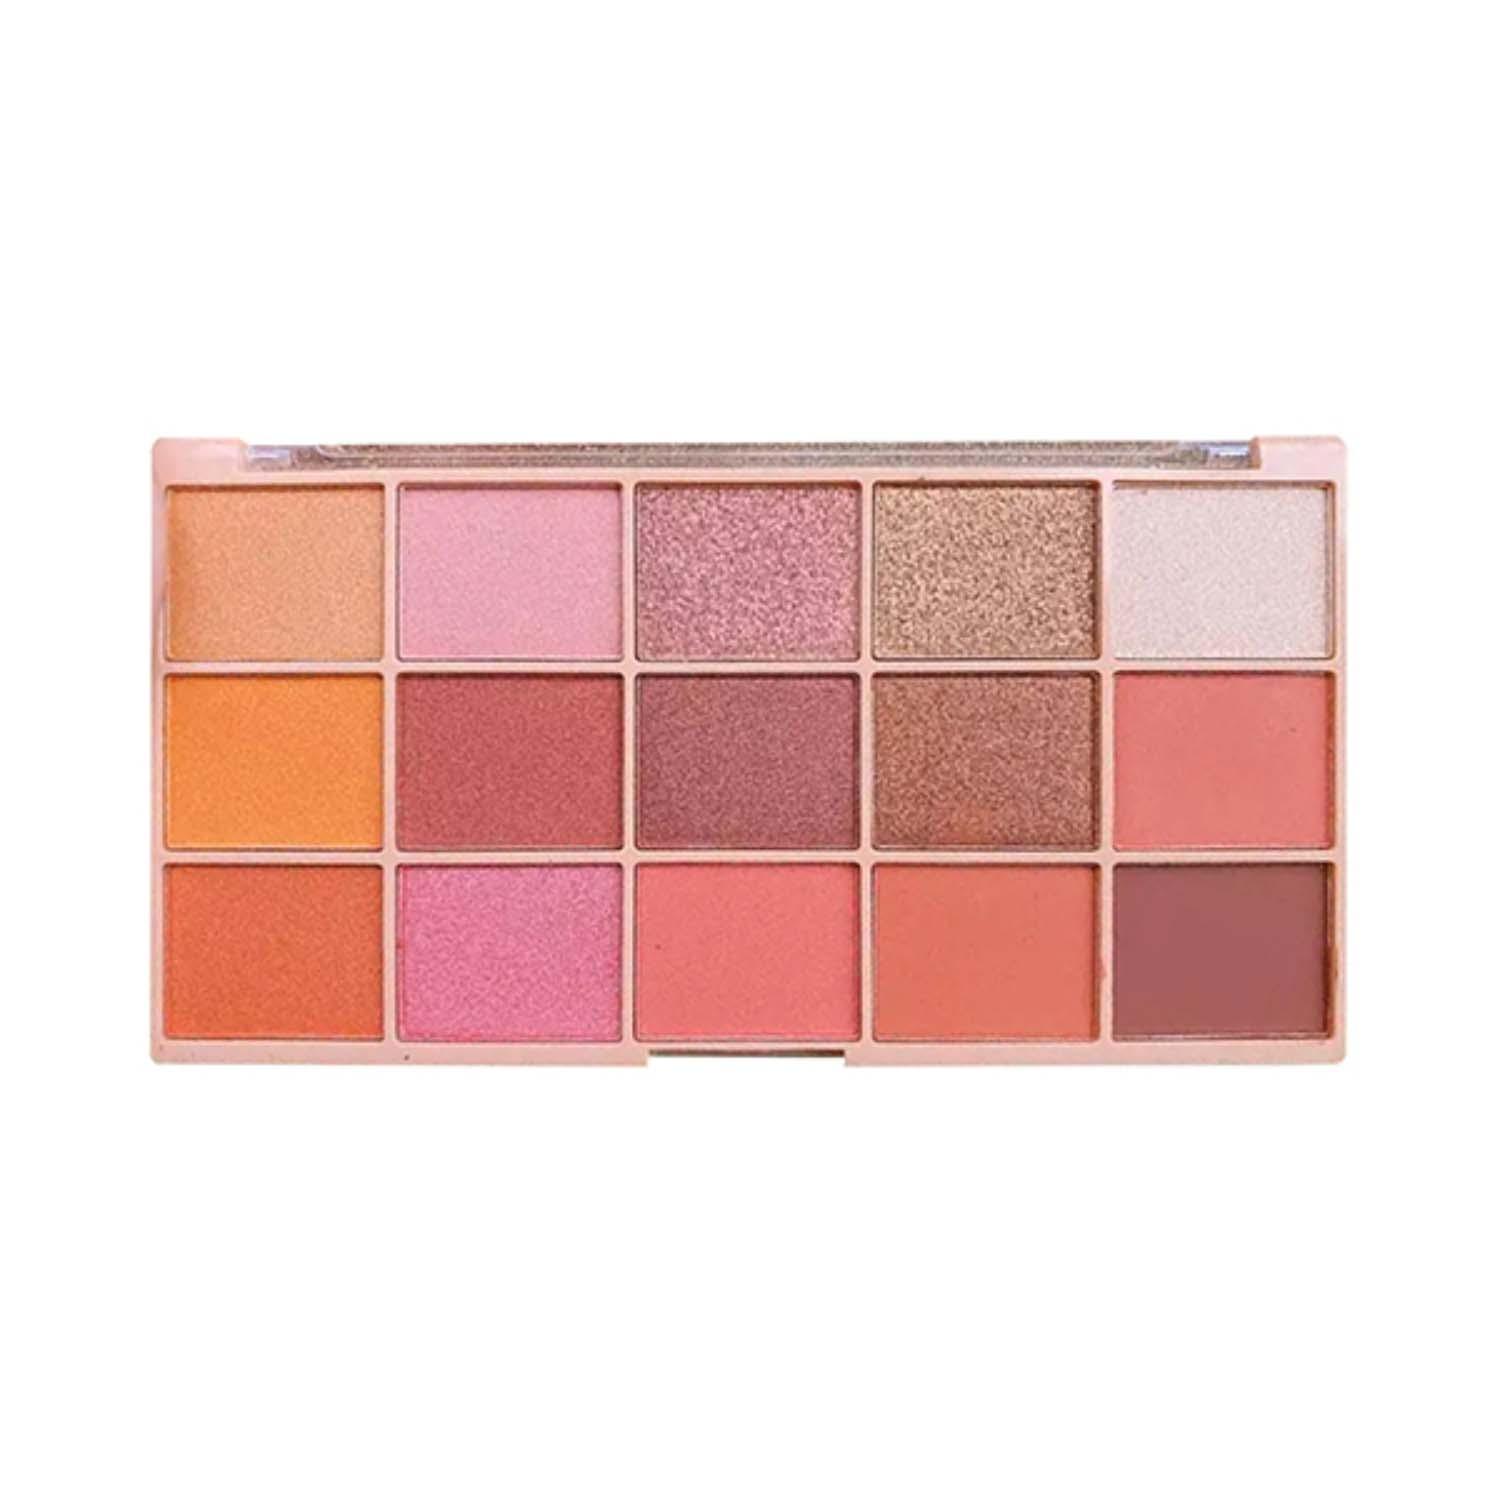 sivanna colors ultra professional luxuriant eyeshadow palette - 02 shade (20g)